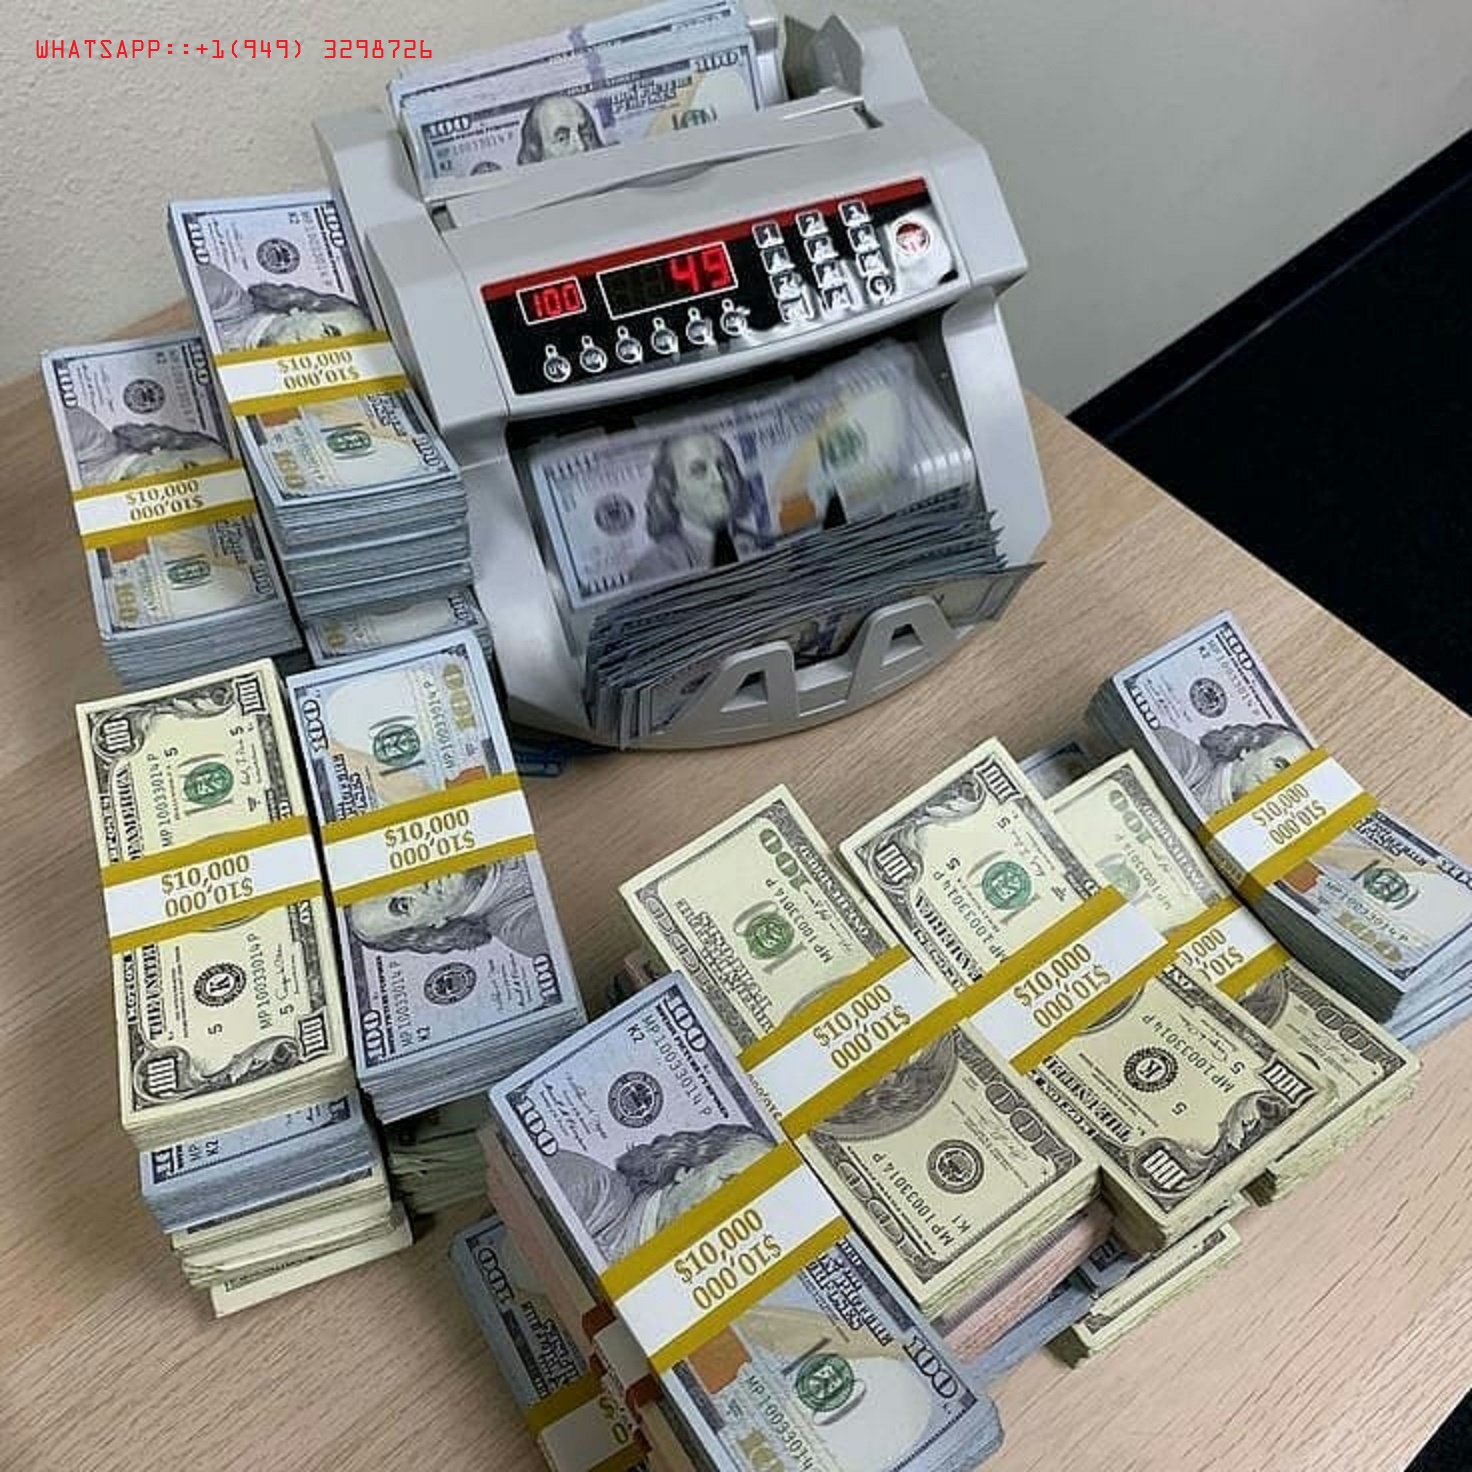 WE PRINT AND SELL PERFECT GRADE COUNTERFEIT MONEY WHATSAPP  1(949) 3298726